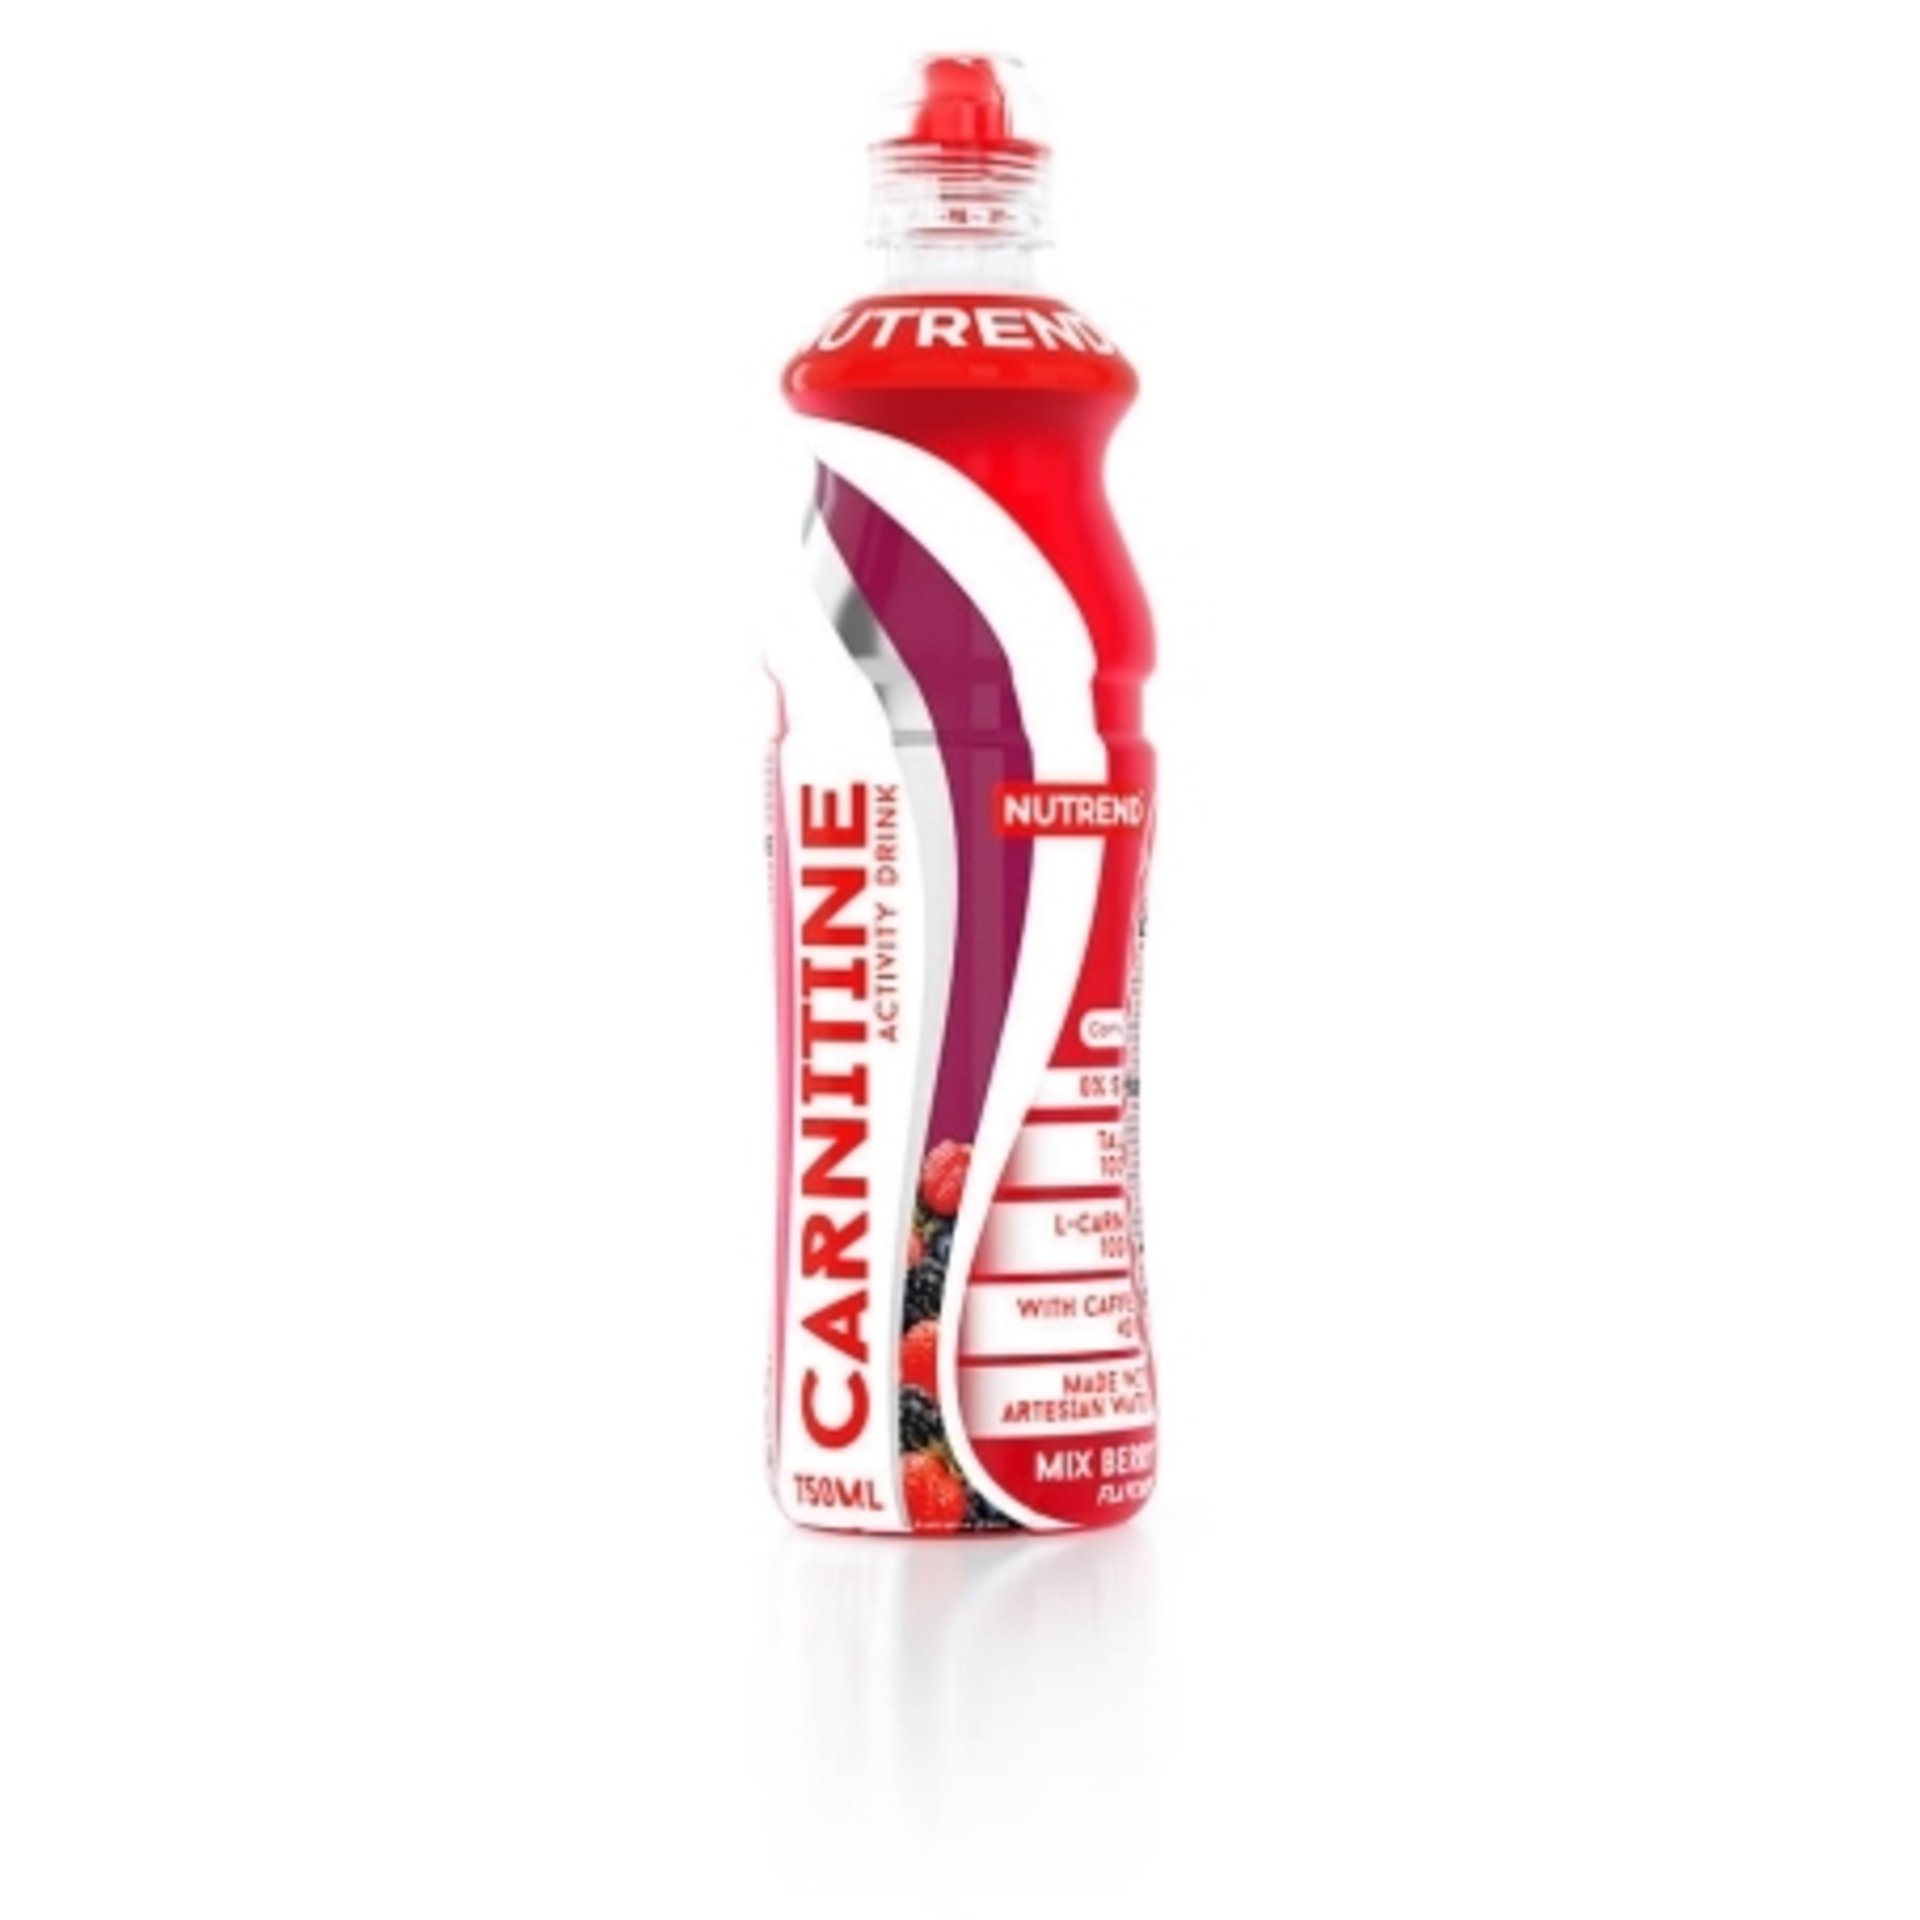 E-shop Nutrend Carnitine activity drink with caffeine 750 ml - mix berry